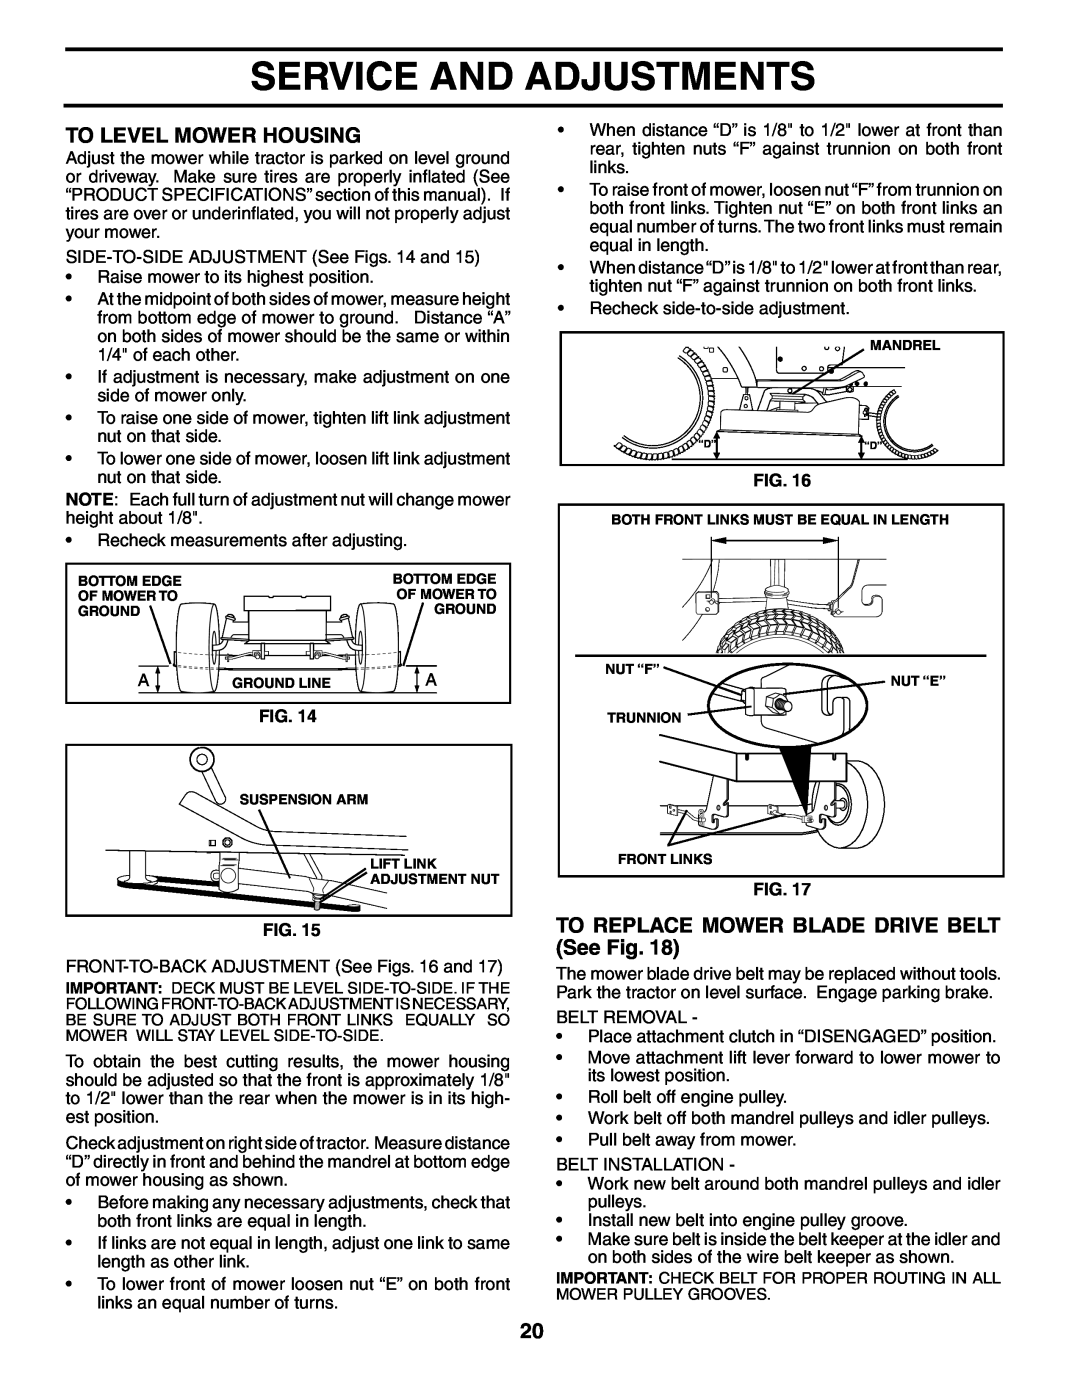 Weed Eater 403284, 96016001400 To Level Mower Housing, TO REPLACE MOWER BLADE DRIVE BELT See Fig, Service And Adjustments 